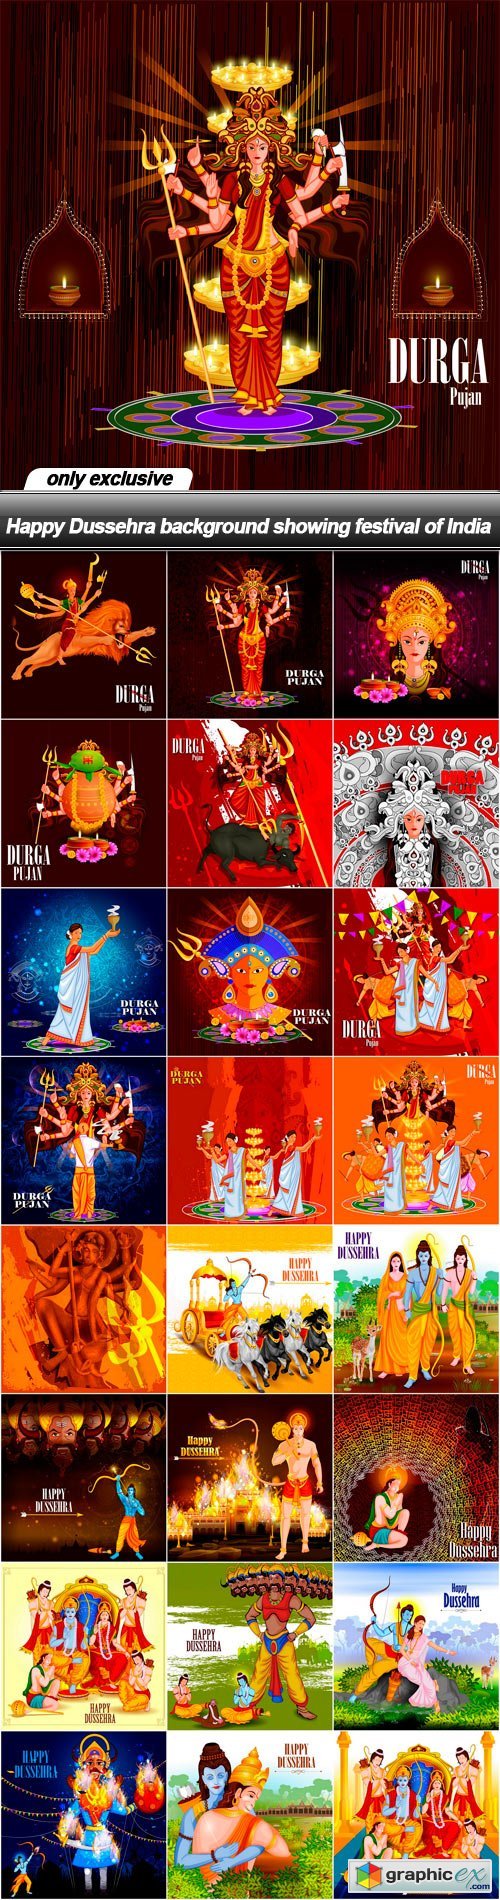 Happy Dussehra background showing festival of India - 25 EPS